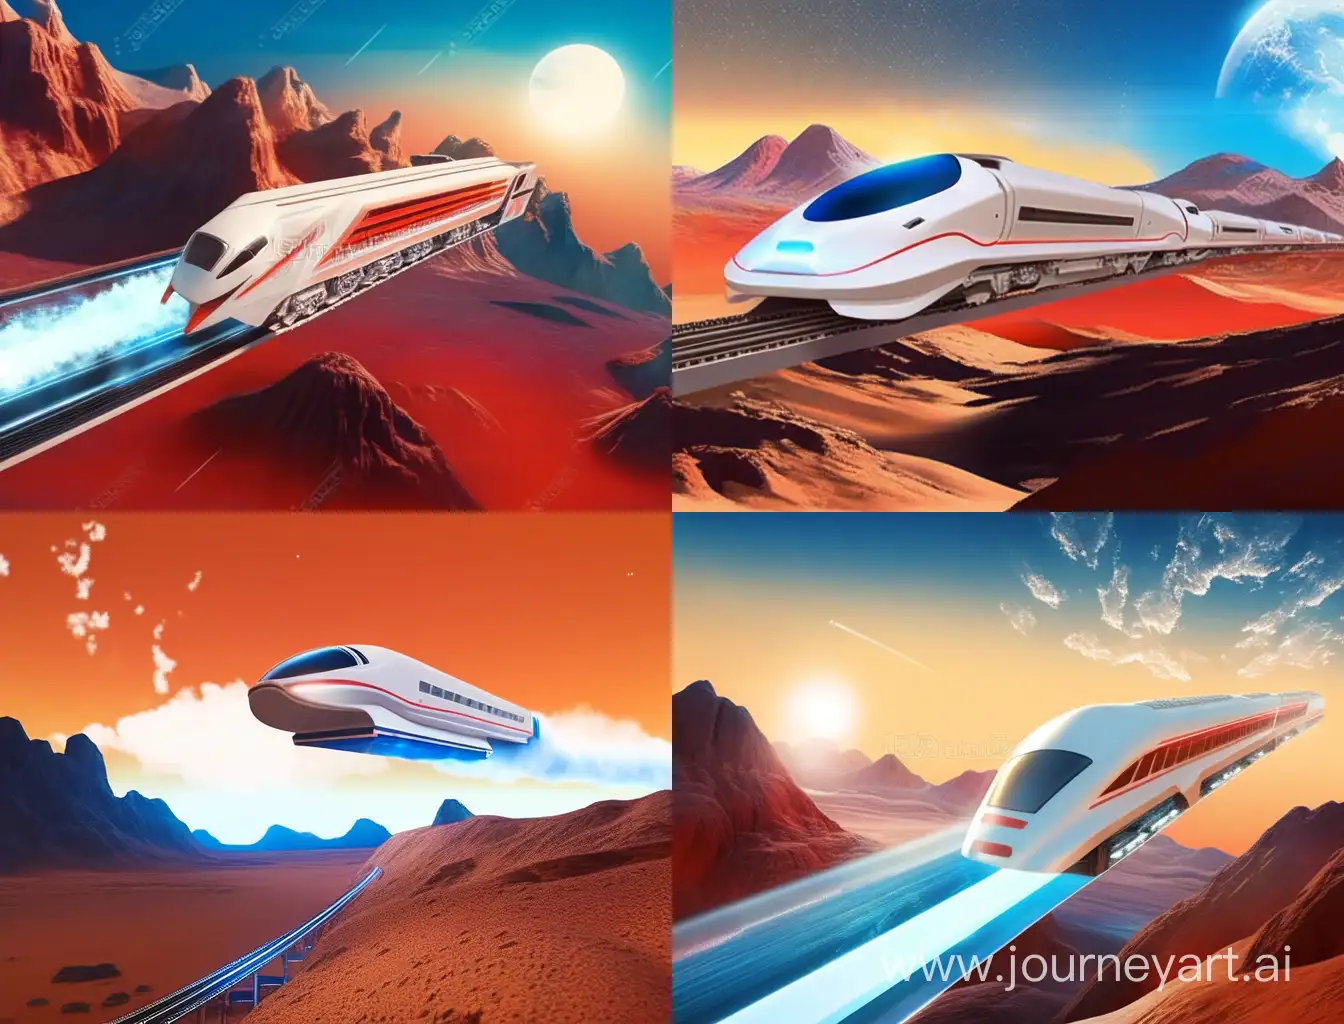 futuristic white train traveling at high speed in the sky above the surface of Mars. The train is sleek and aerodynamic, with blue energy glowing from its sides. The train is leaving a contrail of blue energy behind it. The surface of Mars is red and dusty, with craters and mountains in the distance. The sky is dark and starry.